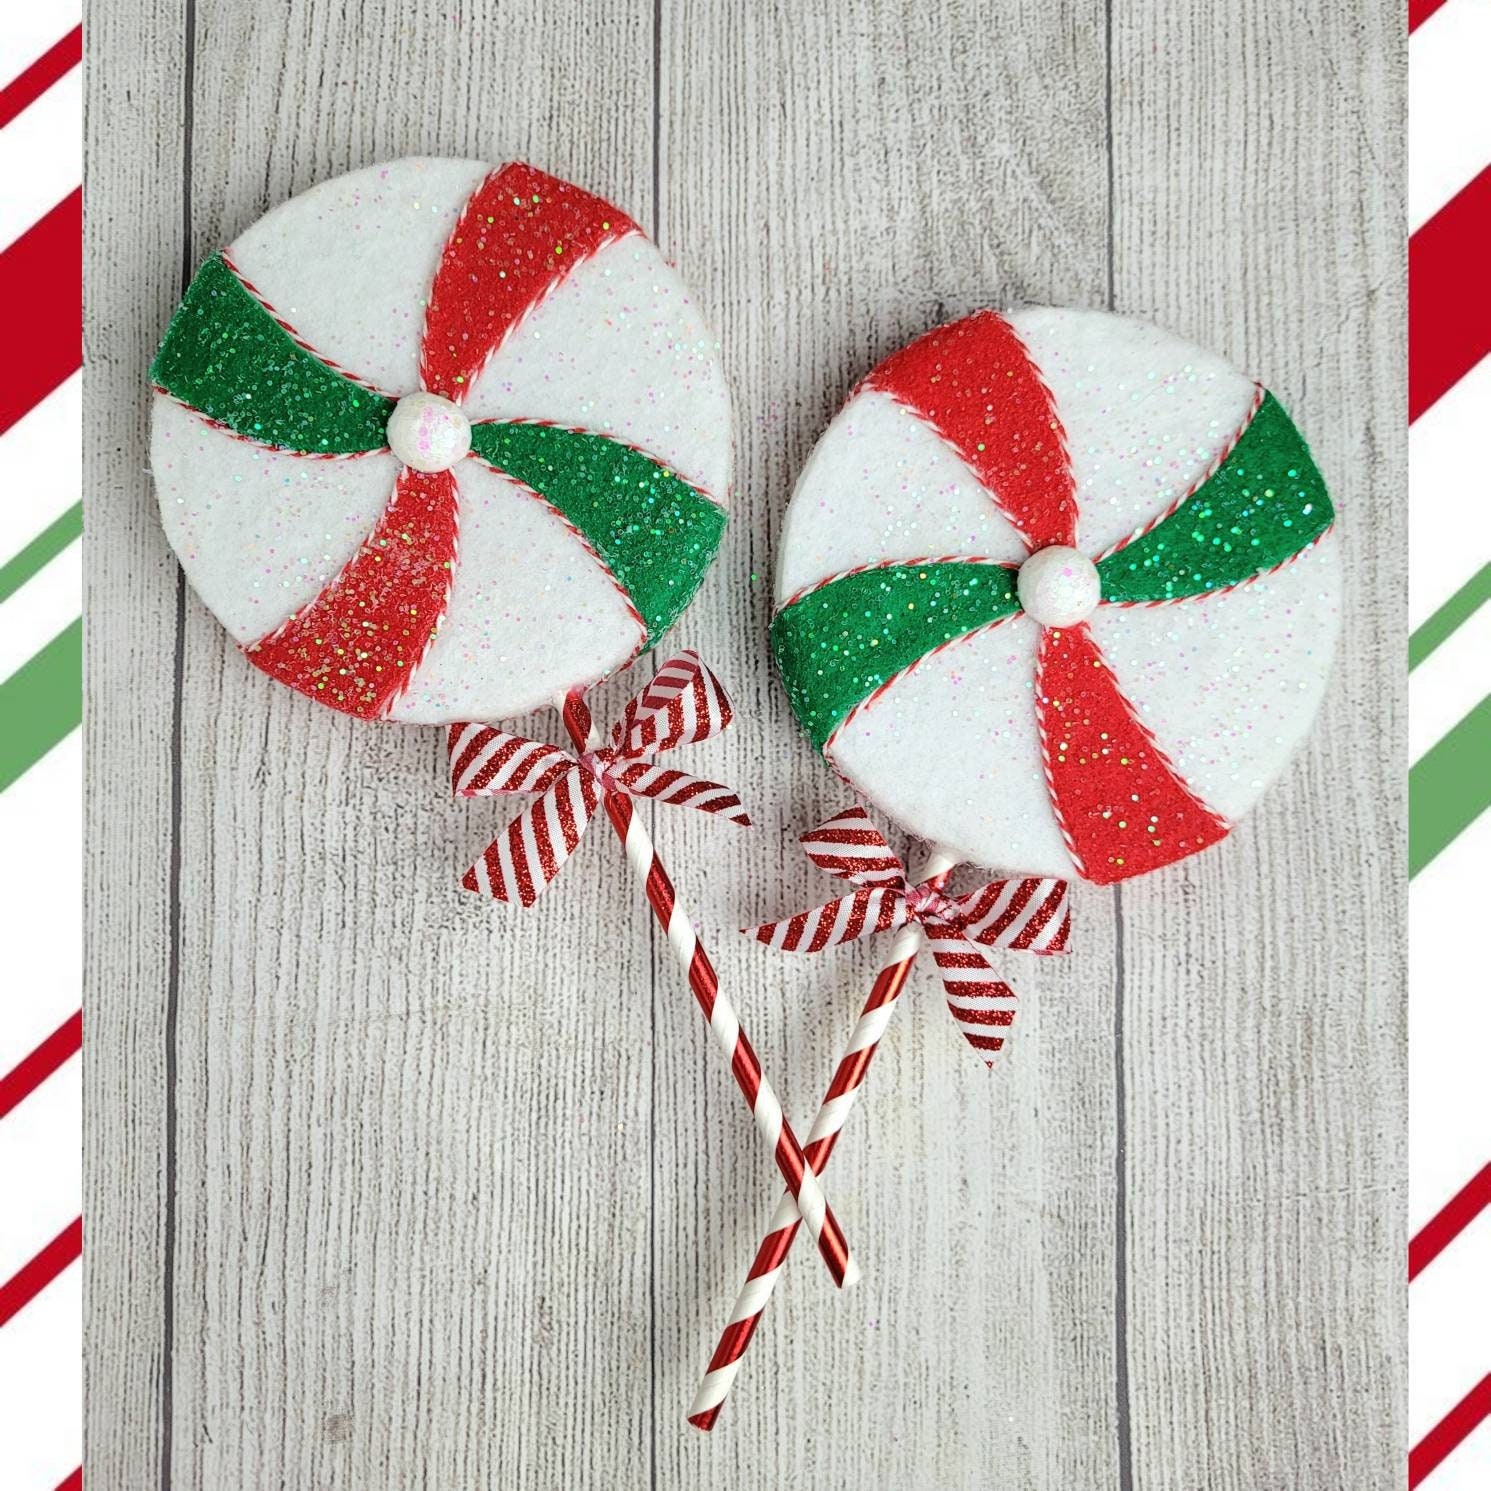 Peppermint Christmas Decor, Large Christmas Ornaments, Picks and